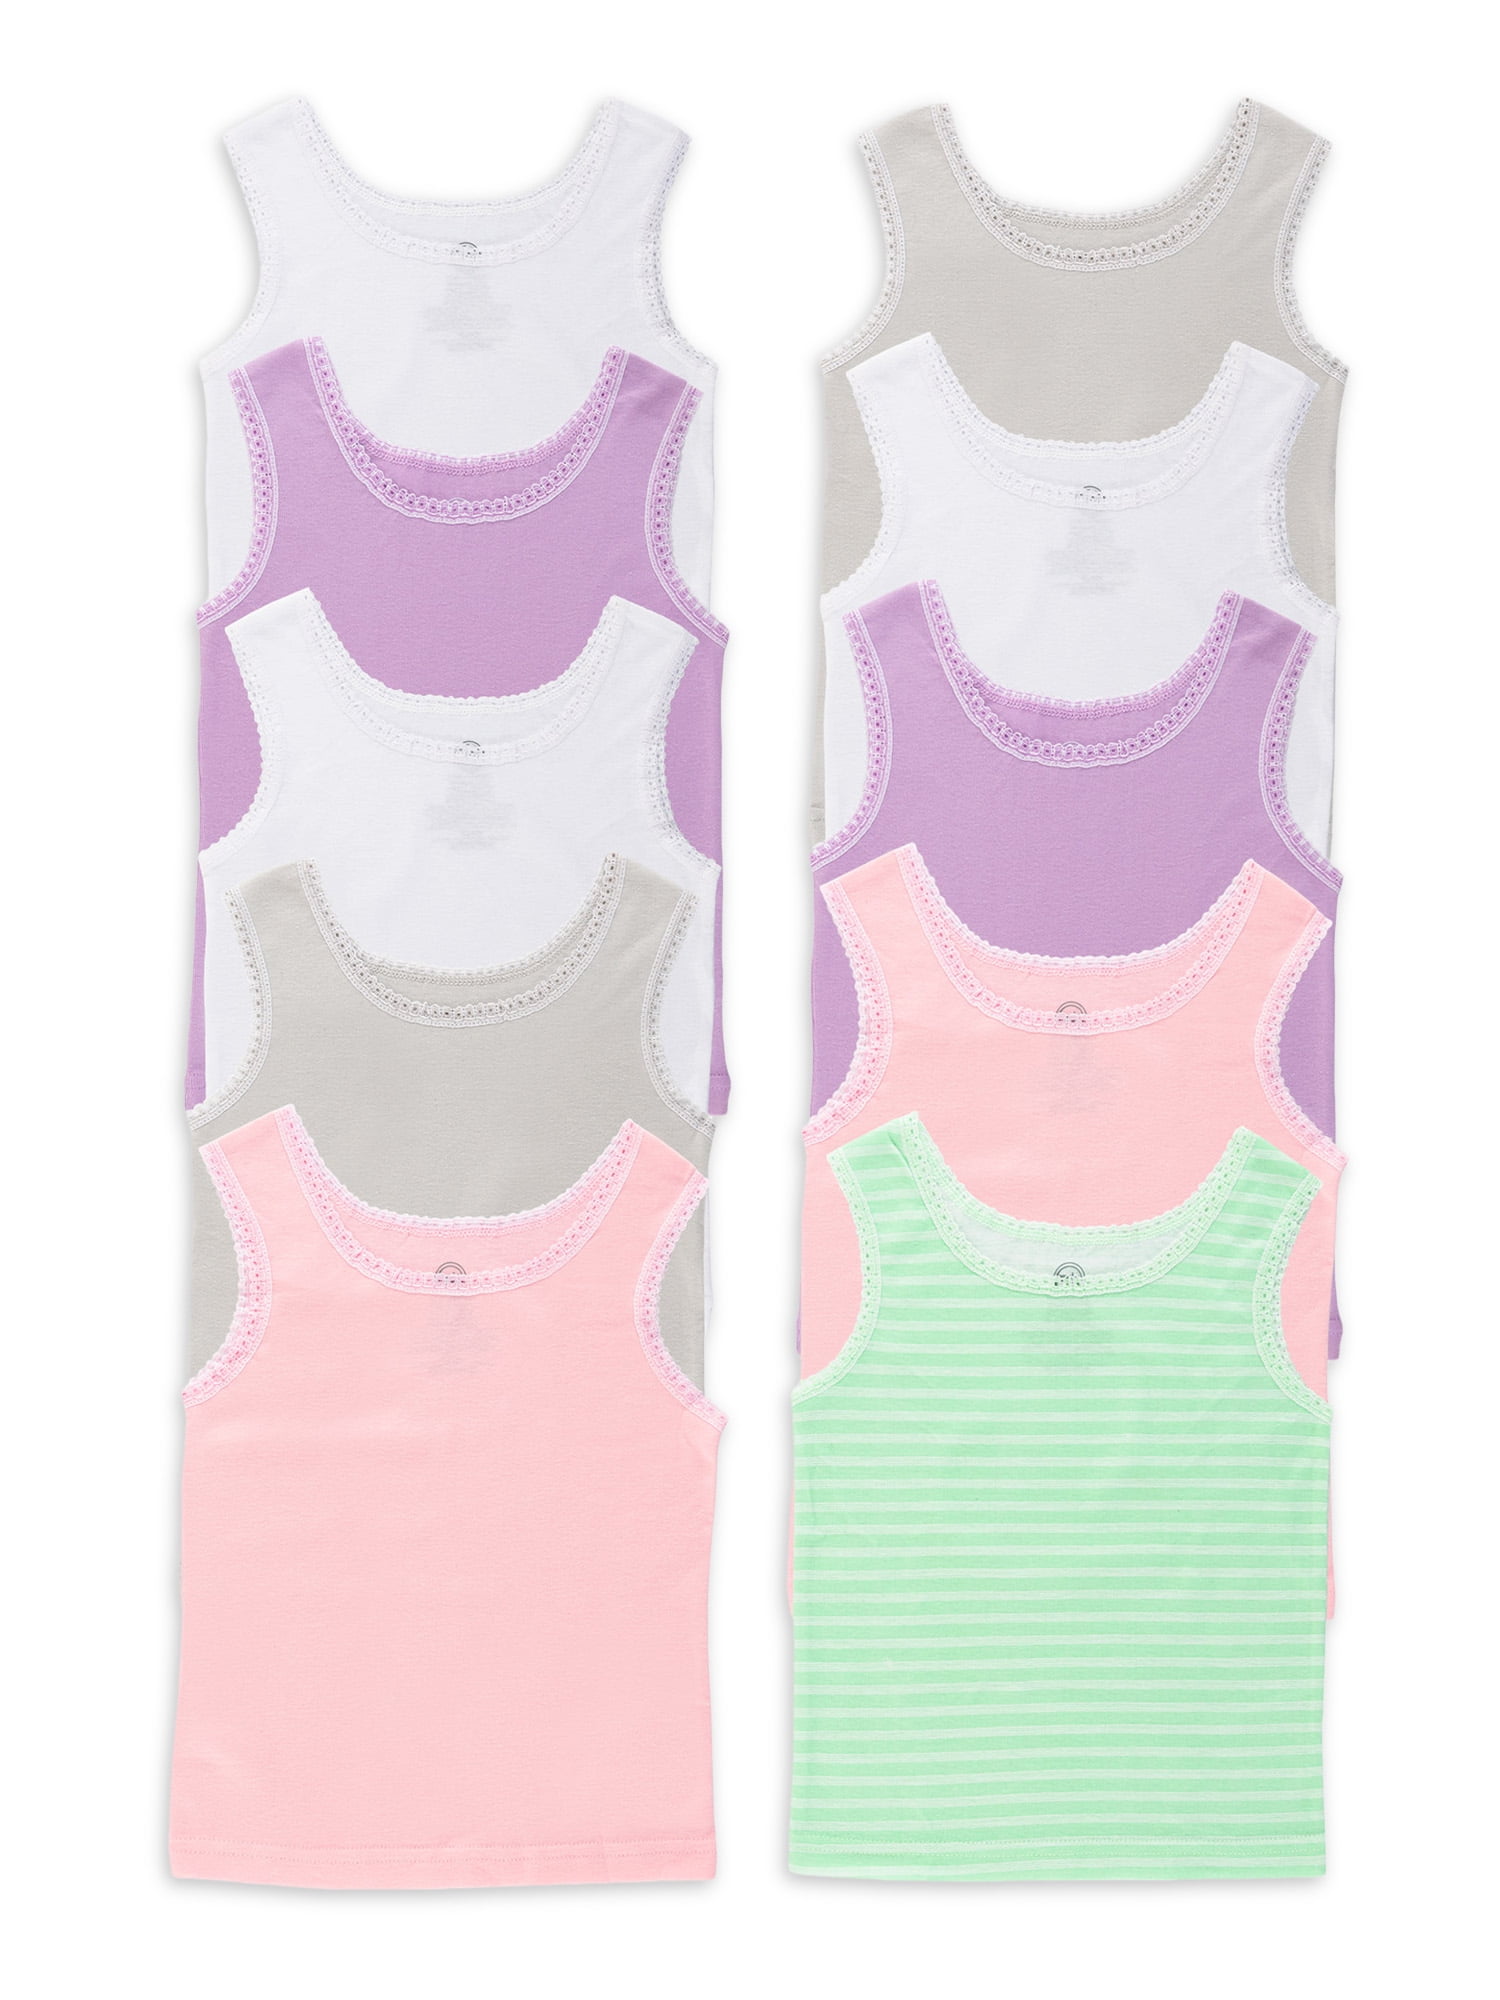 VeaRin Toddler Girls Cotton Assorted Cami Undershirts Tank Top 3 Pack 